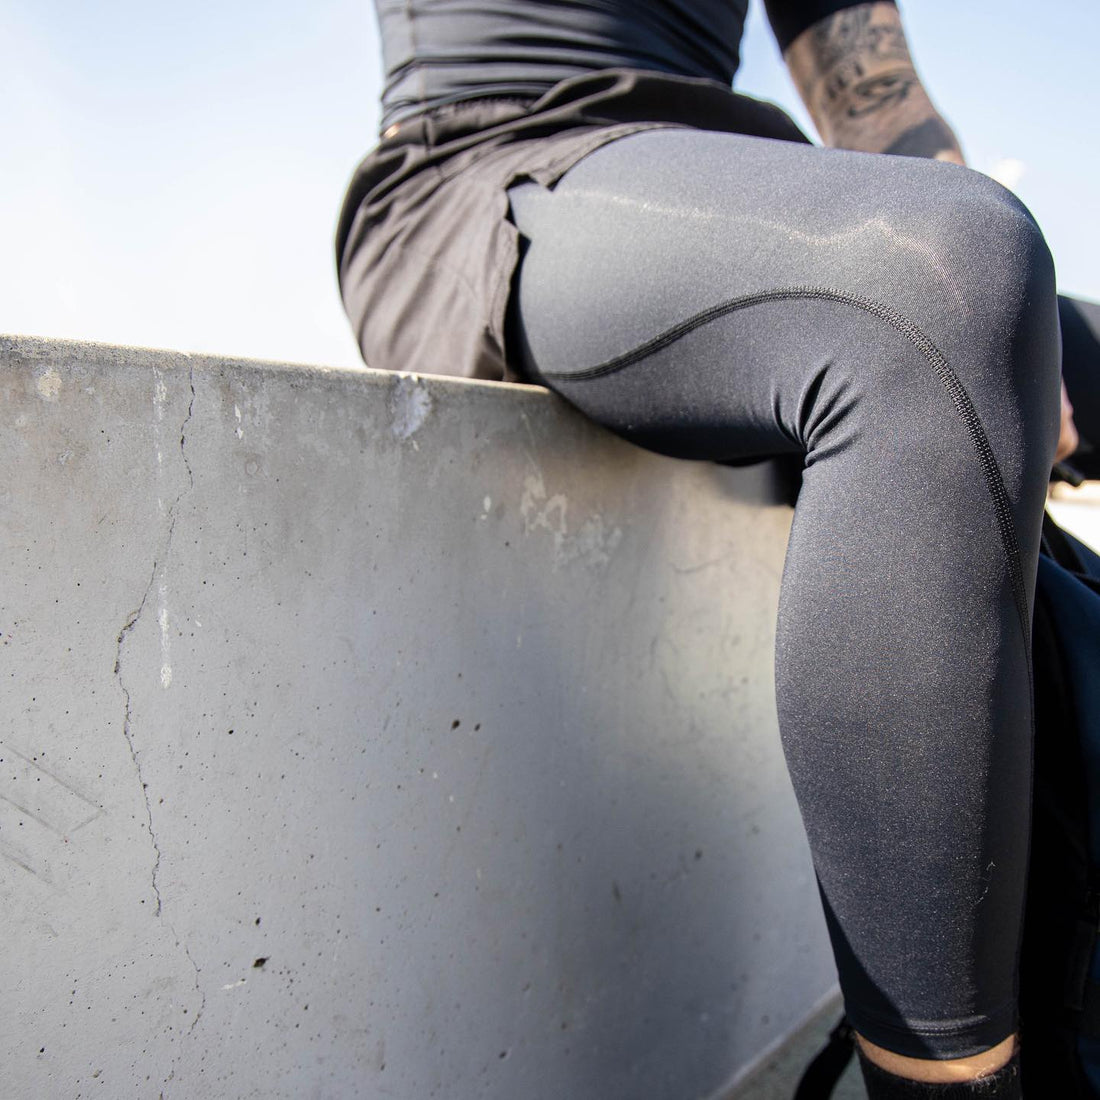 Tips That Make Putting on Your Elite Compression Tights a Snap